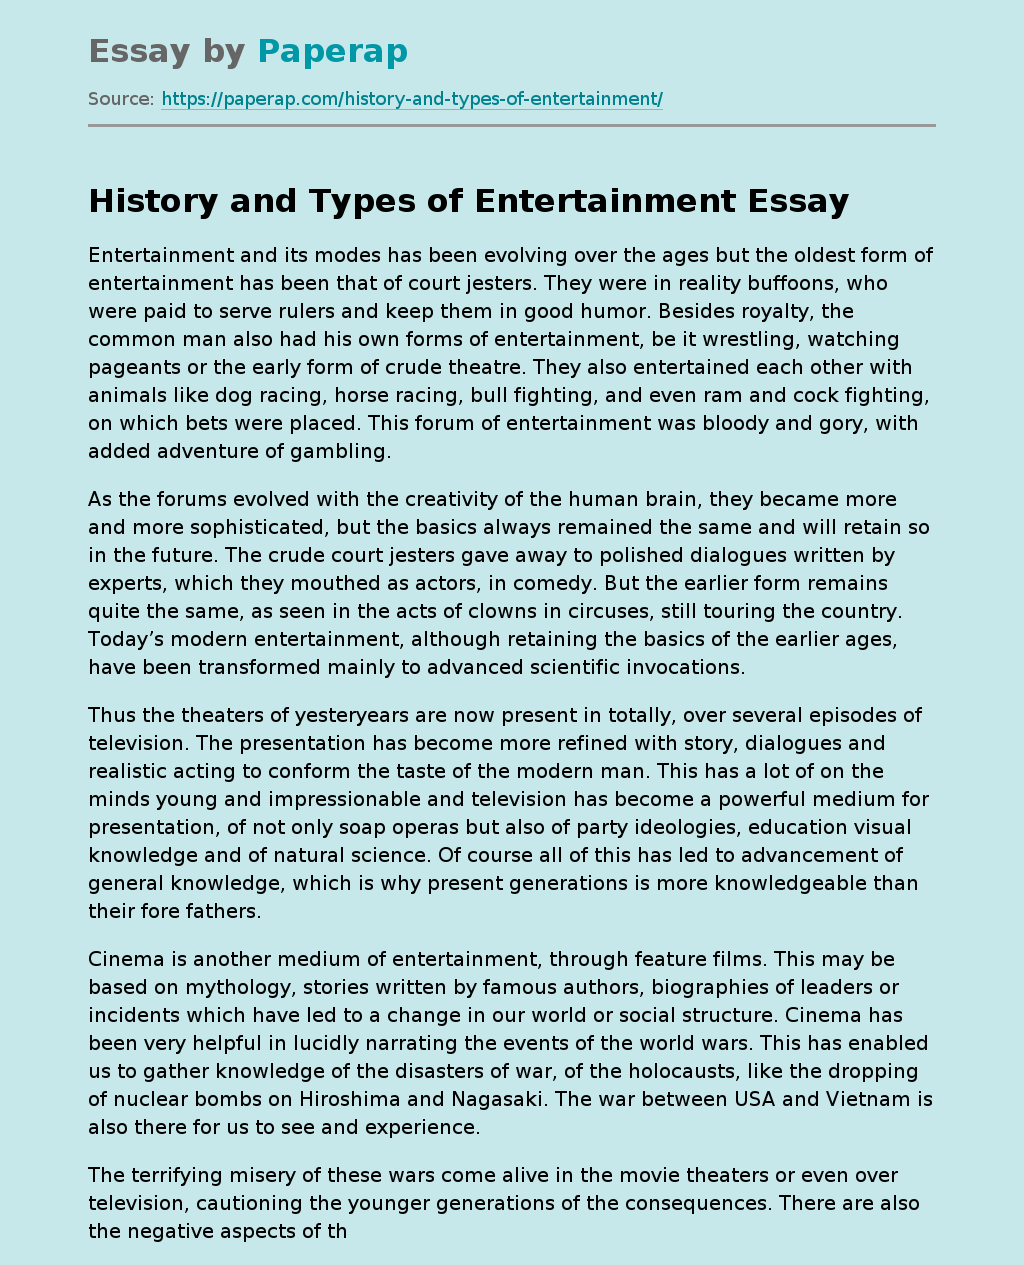 essay topics about entertainment industry